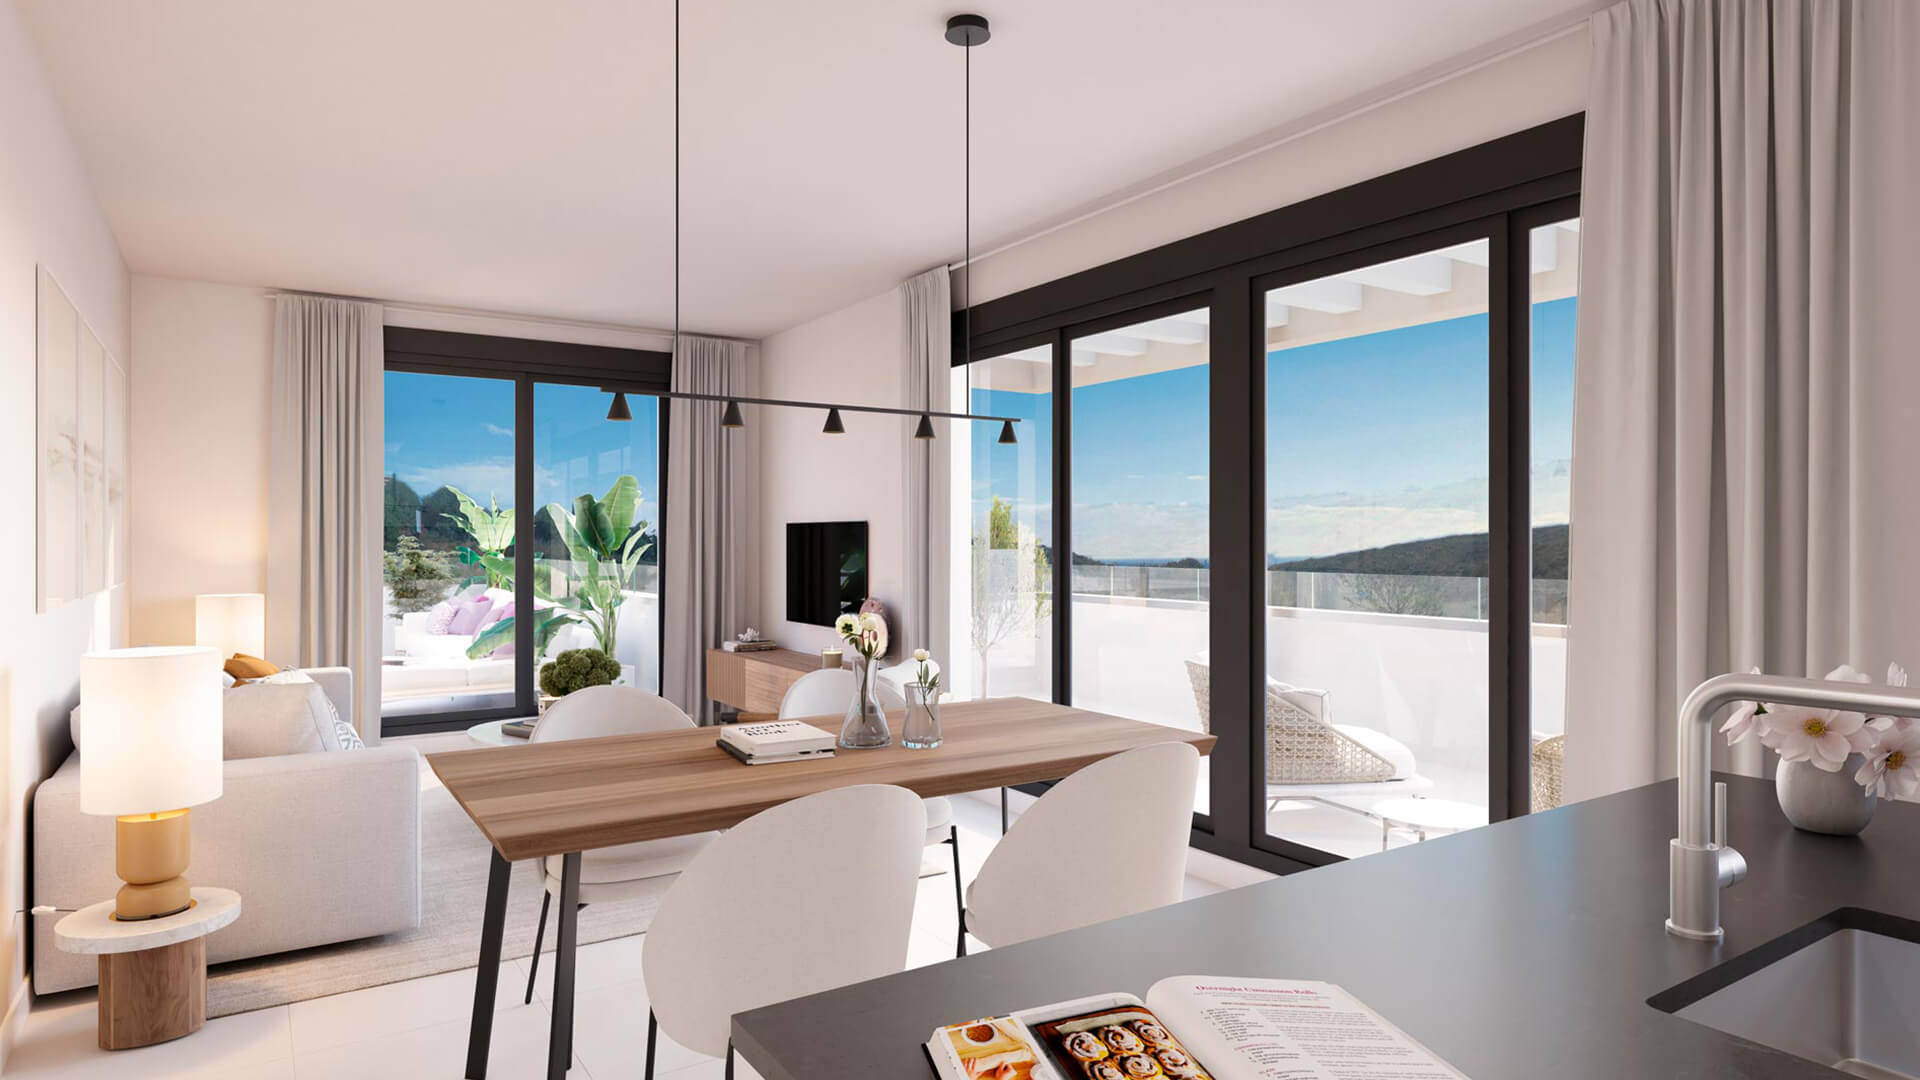 Bliss Homes - Casares